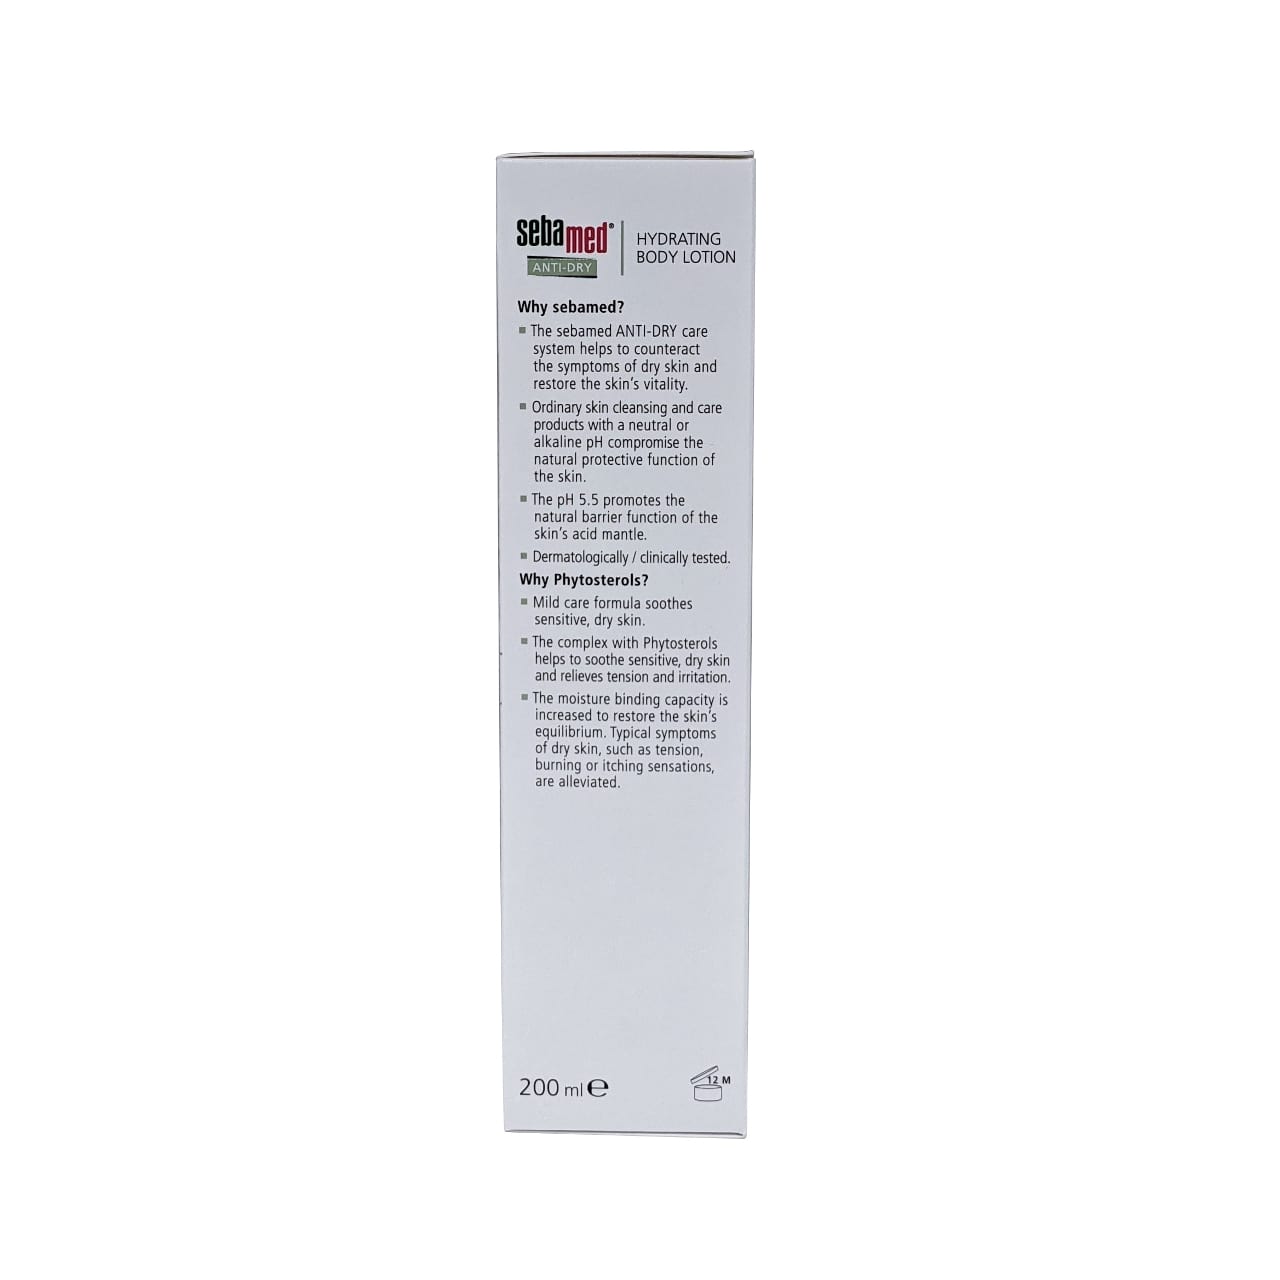 Product description for Sebamed Anti-Dry Hydrating Body Lotion